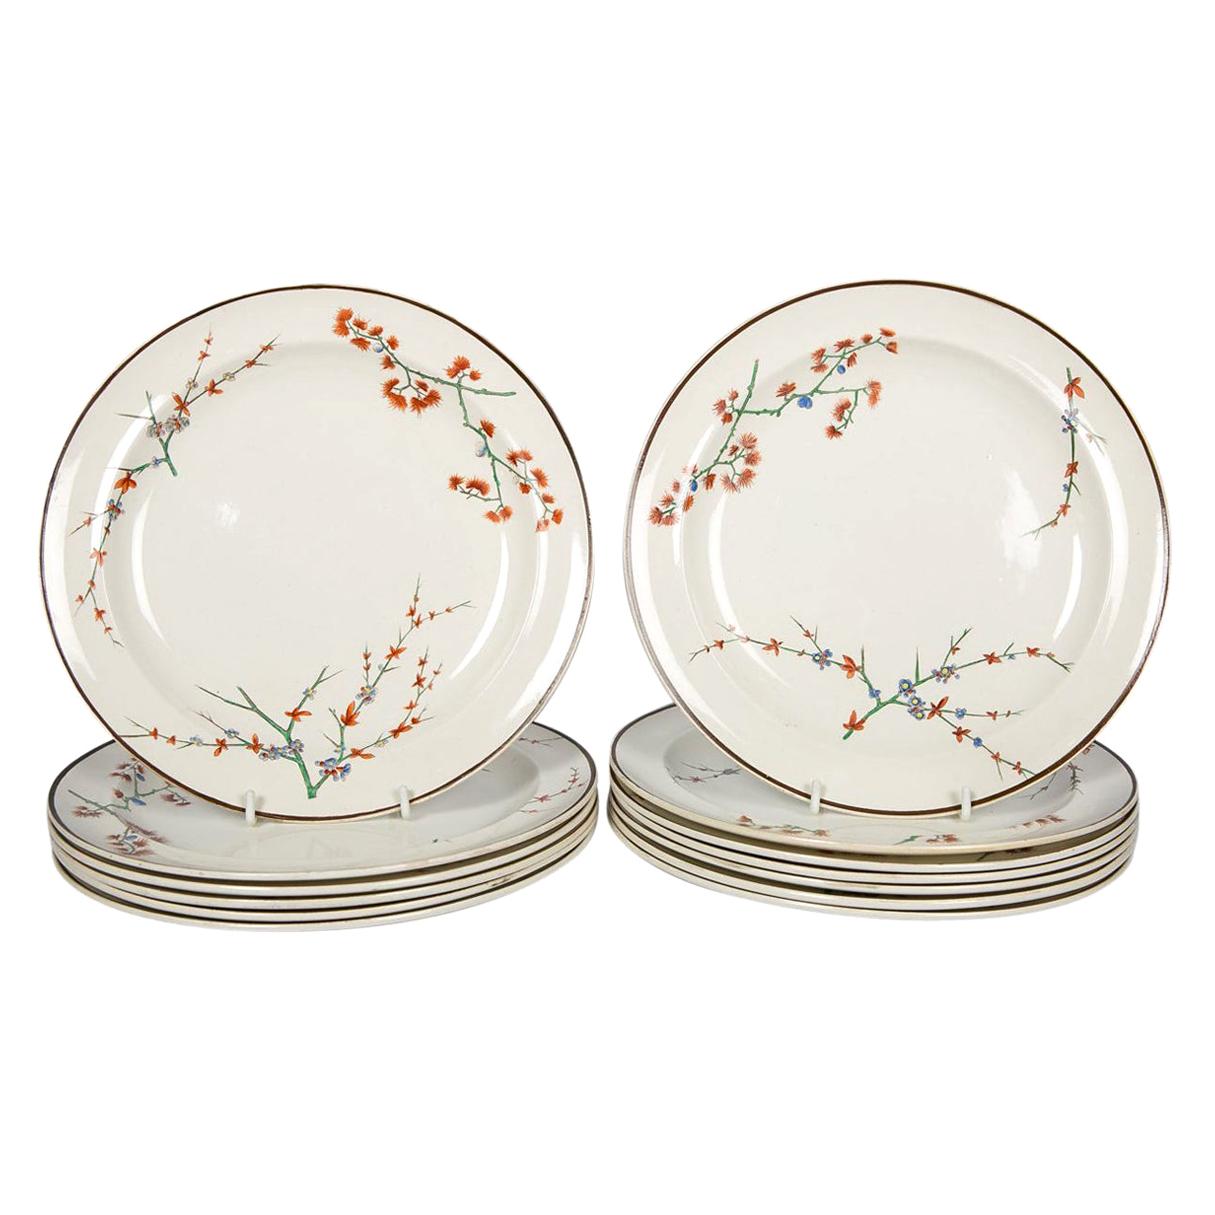 26 Wedgwood Creamware Dinner Plates with Thistle Design Made, circa 1880